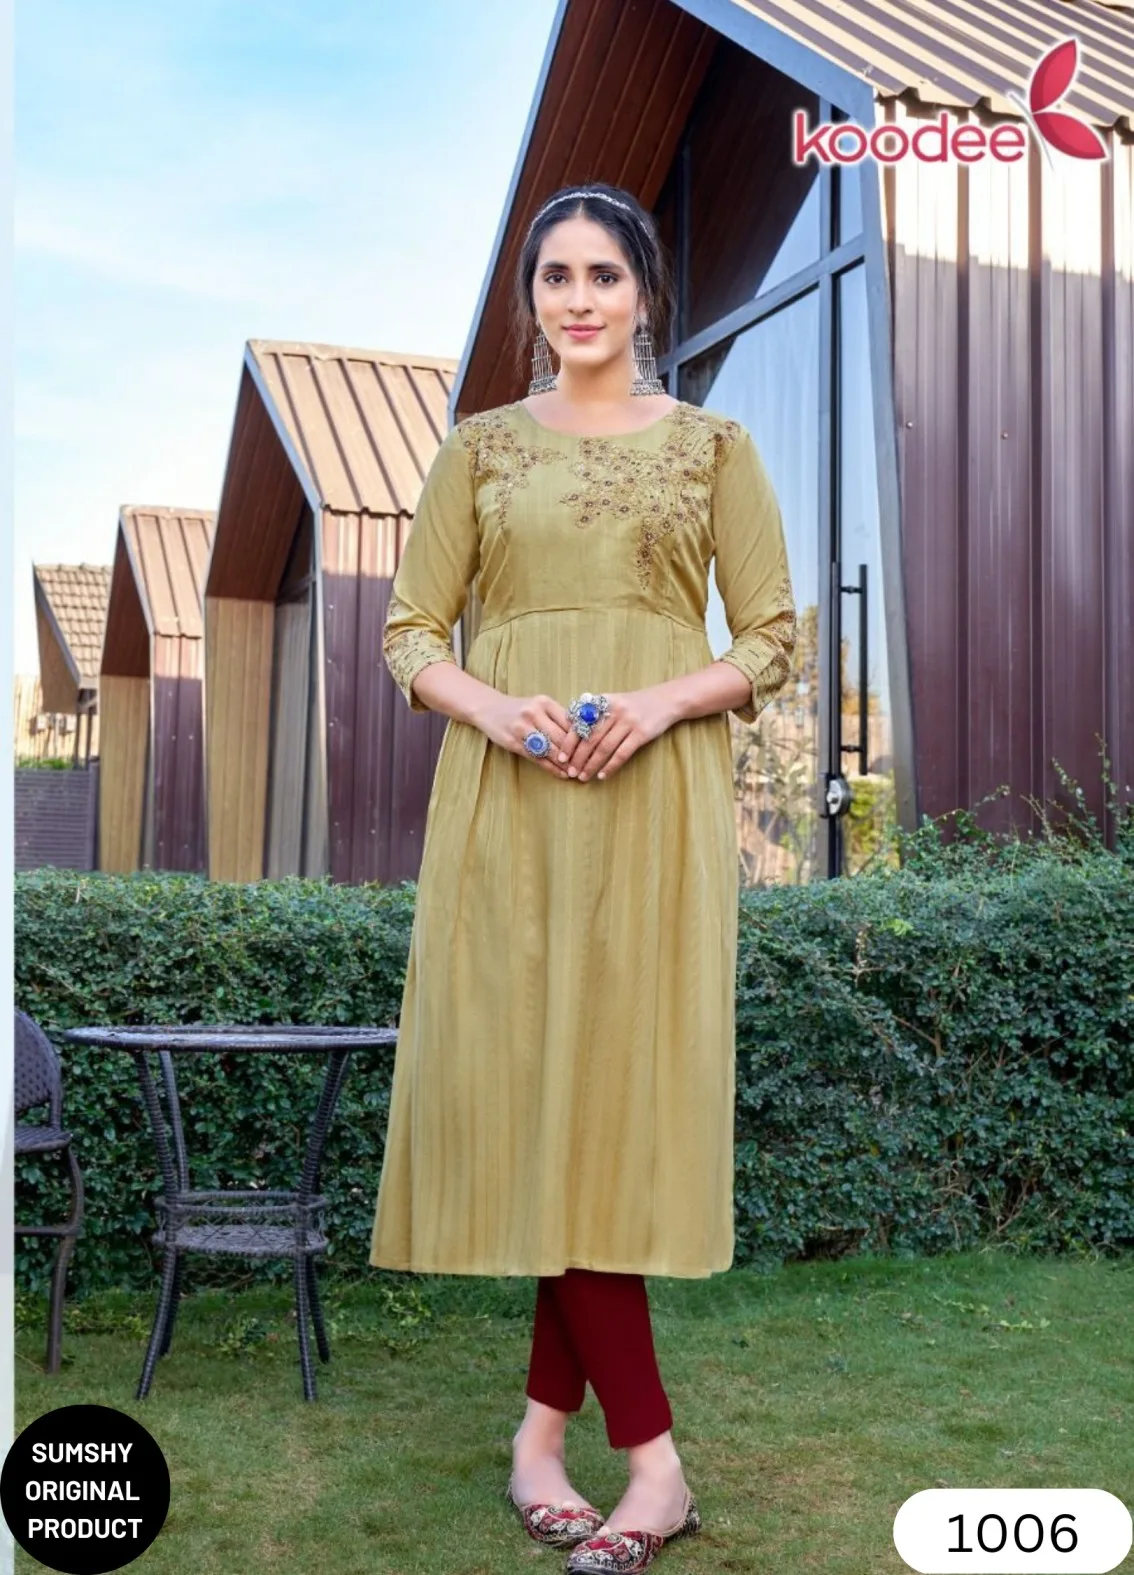 Find Easy-Care Daily Wear Cotton Kurtis Online VCK1552 – Ahika